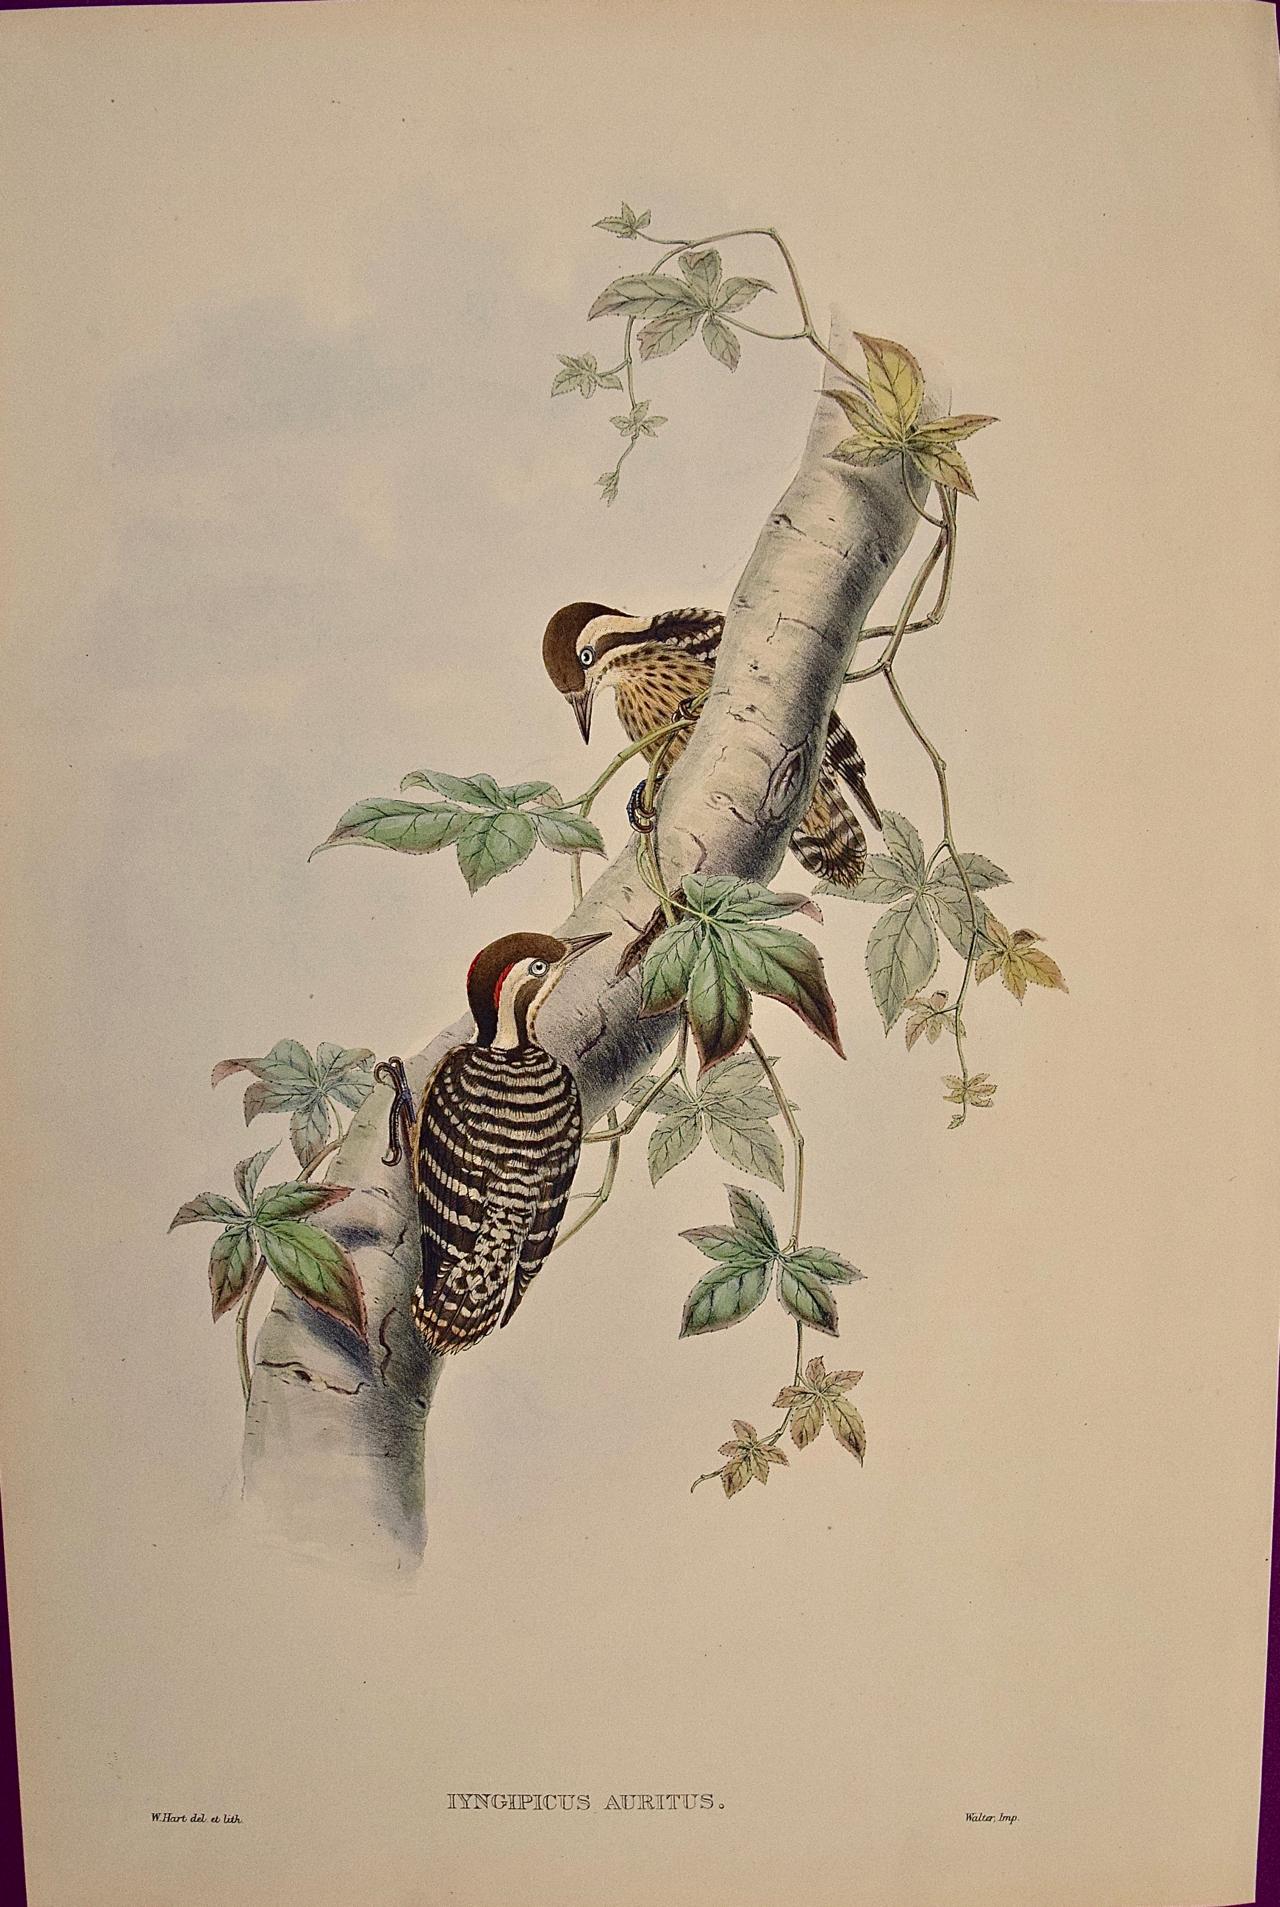 John Gould and Henry Constantine Richter Landscape Print - 19th C. Gould Hand-colored Lithograph of Malayan Pygmy Woodpeckers